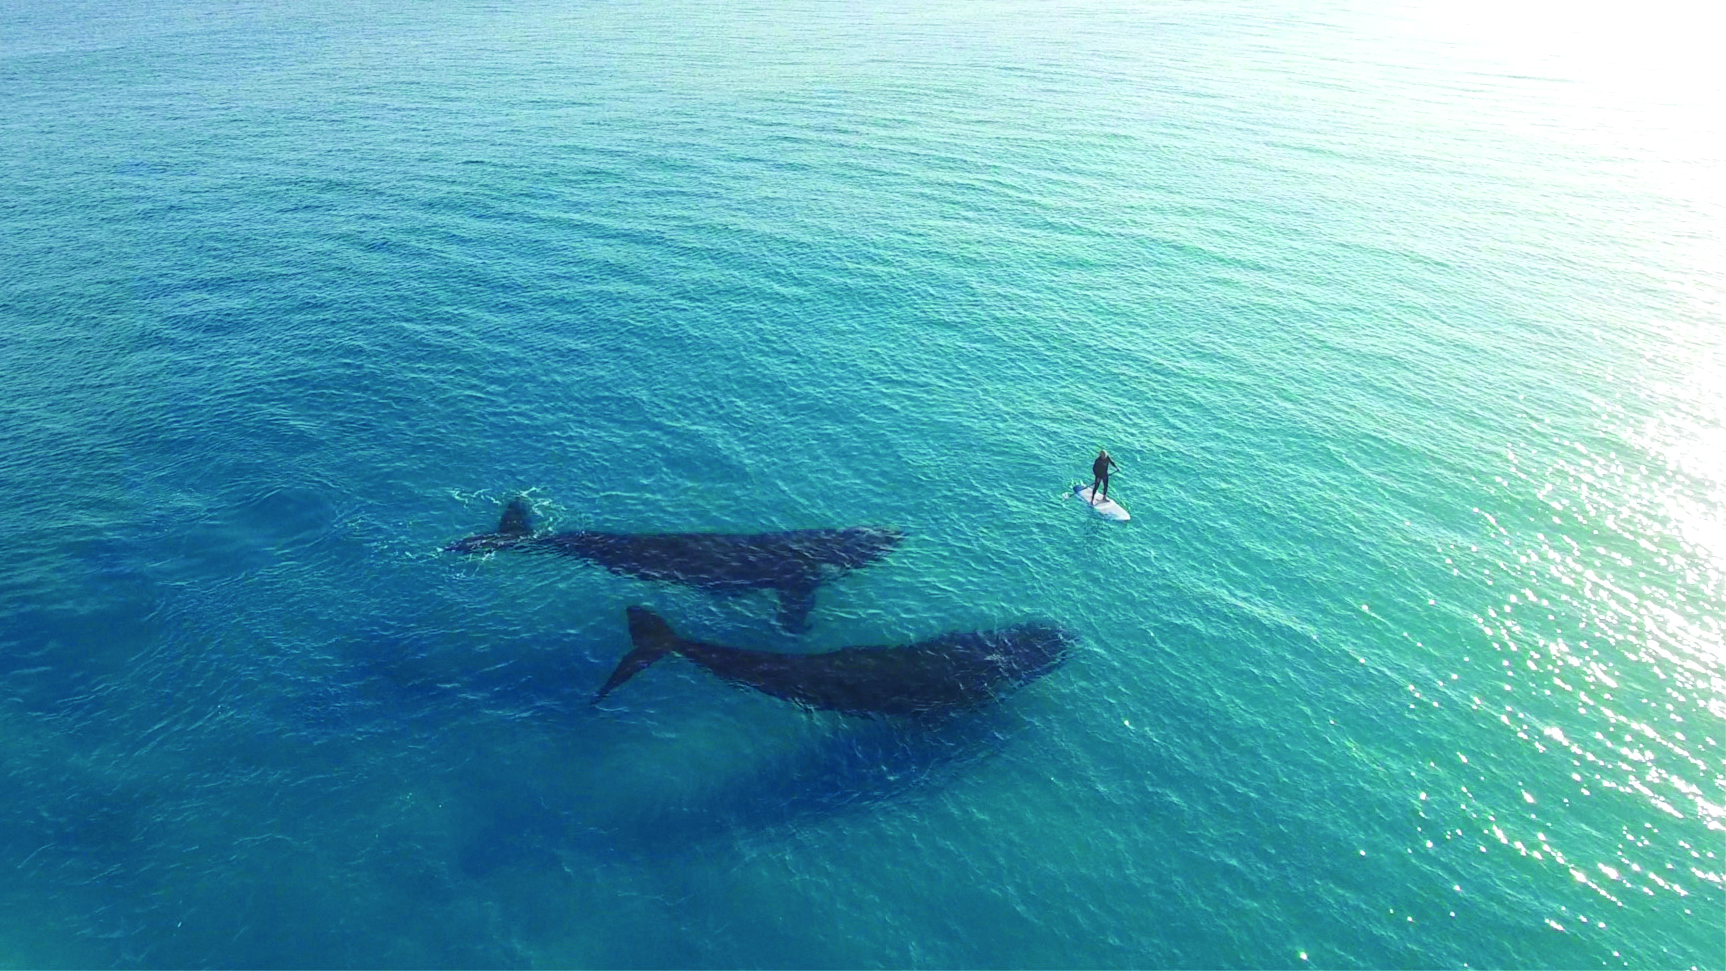 Paddle boarding with whales, credit Jaimen Hudson